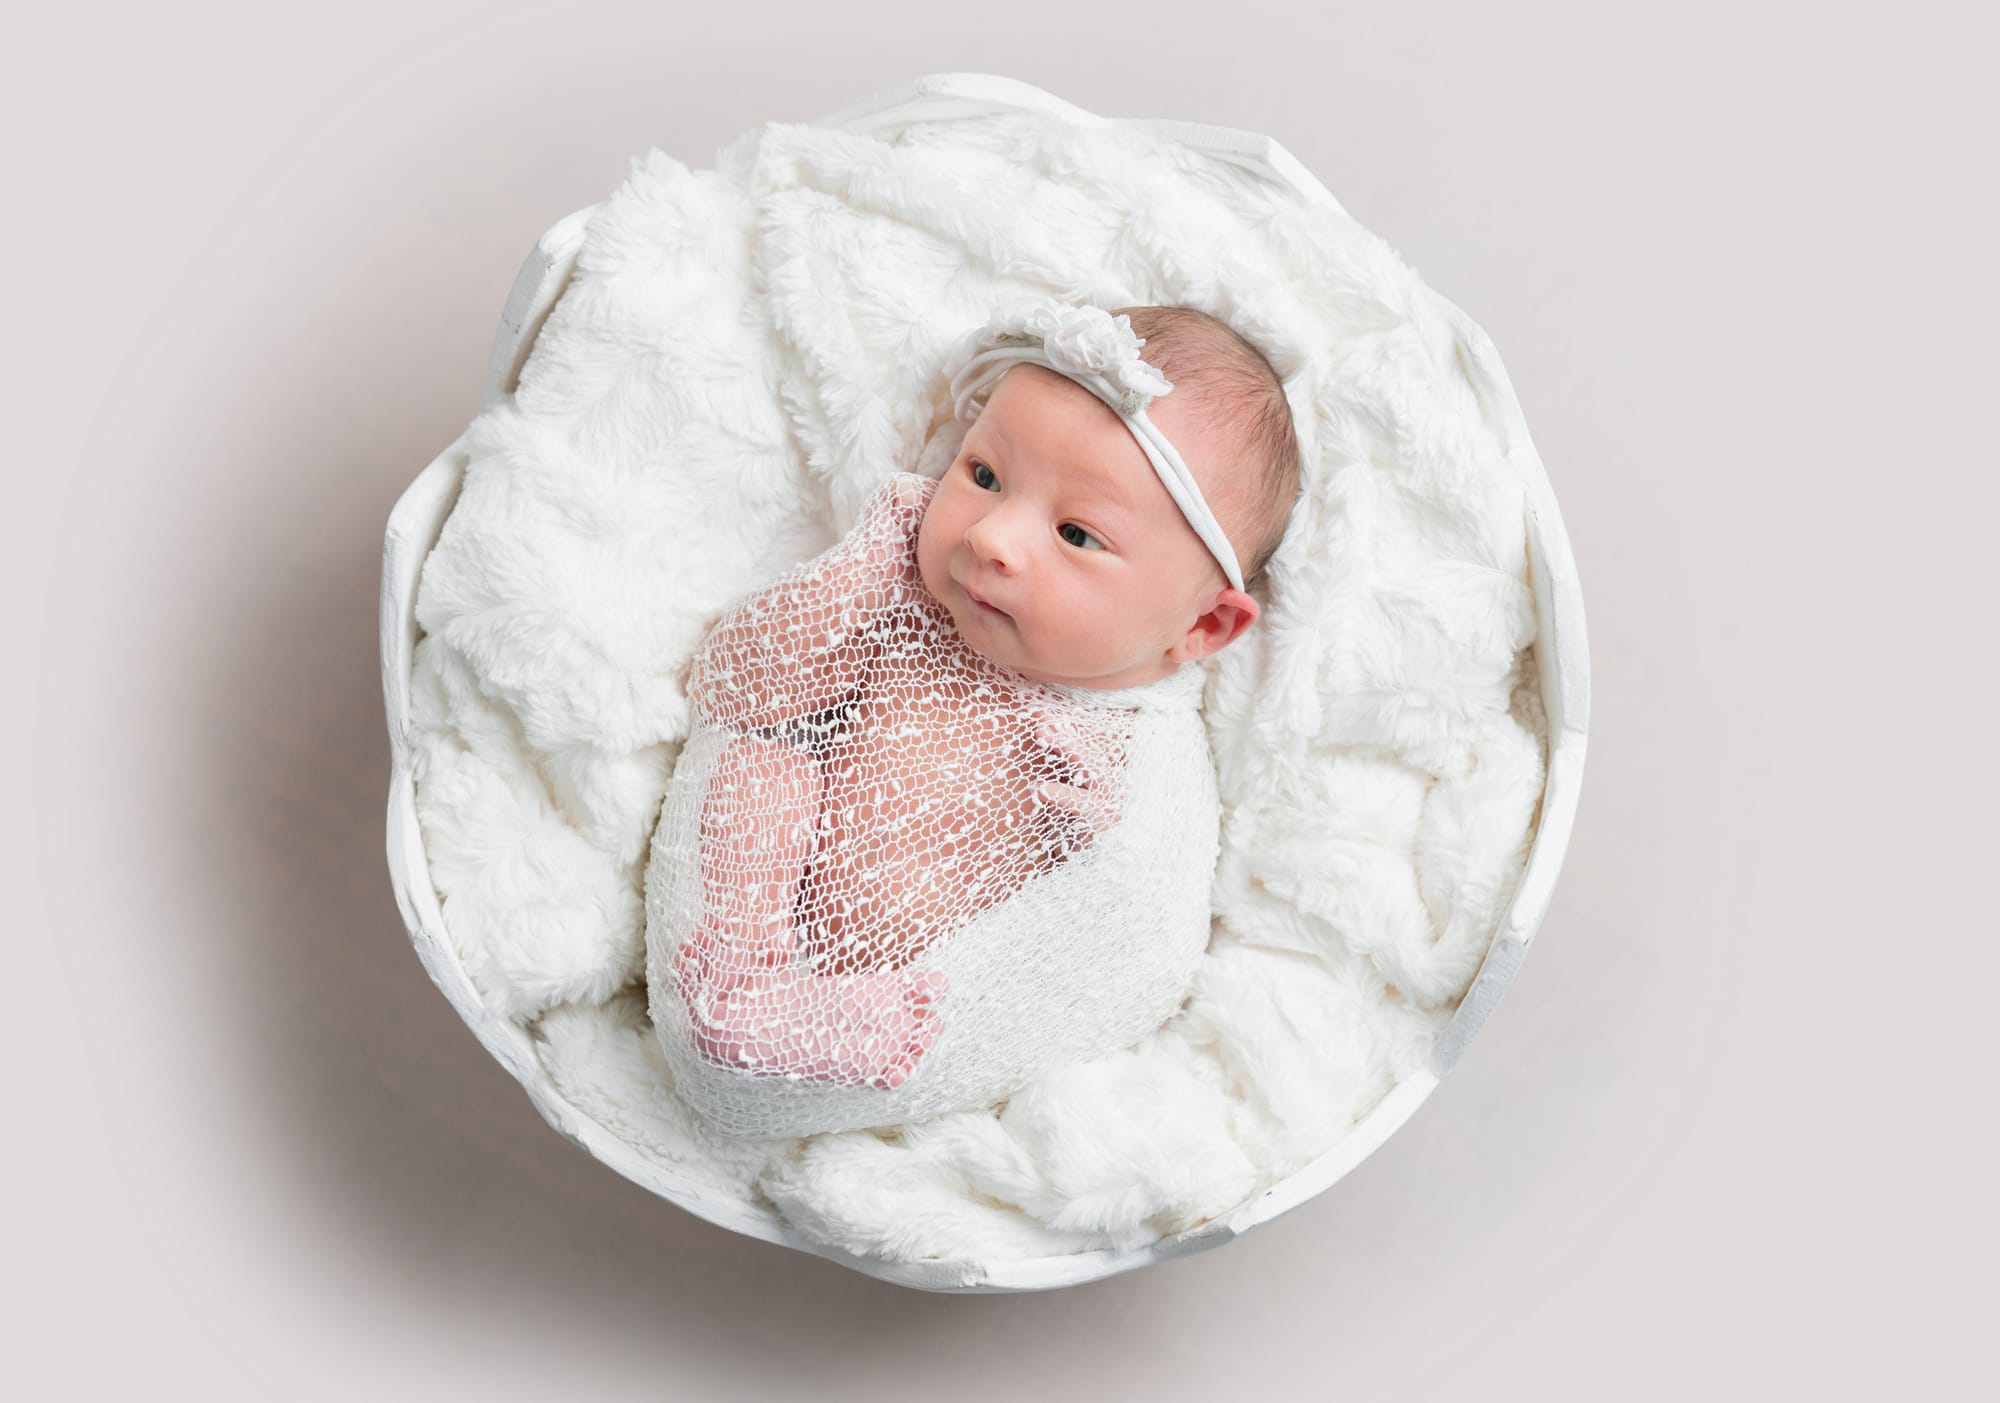 Top view of newborn baby girl laying in a bowl